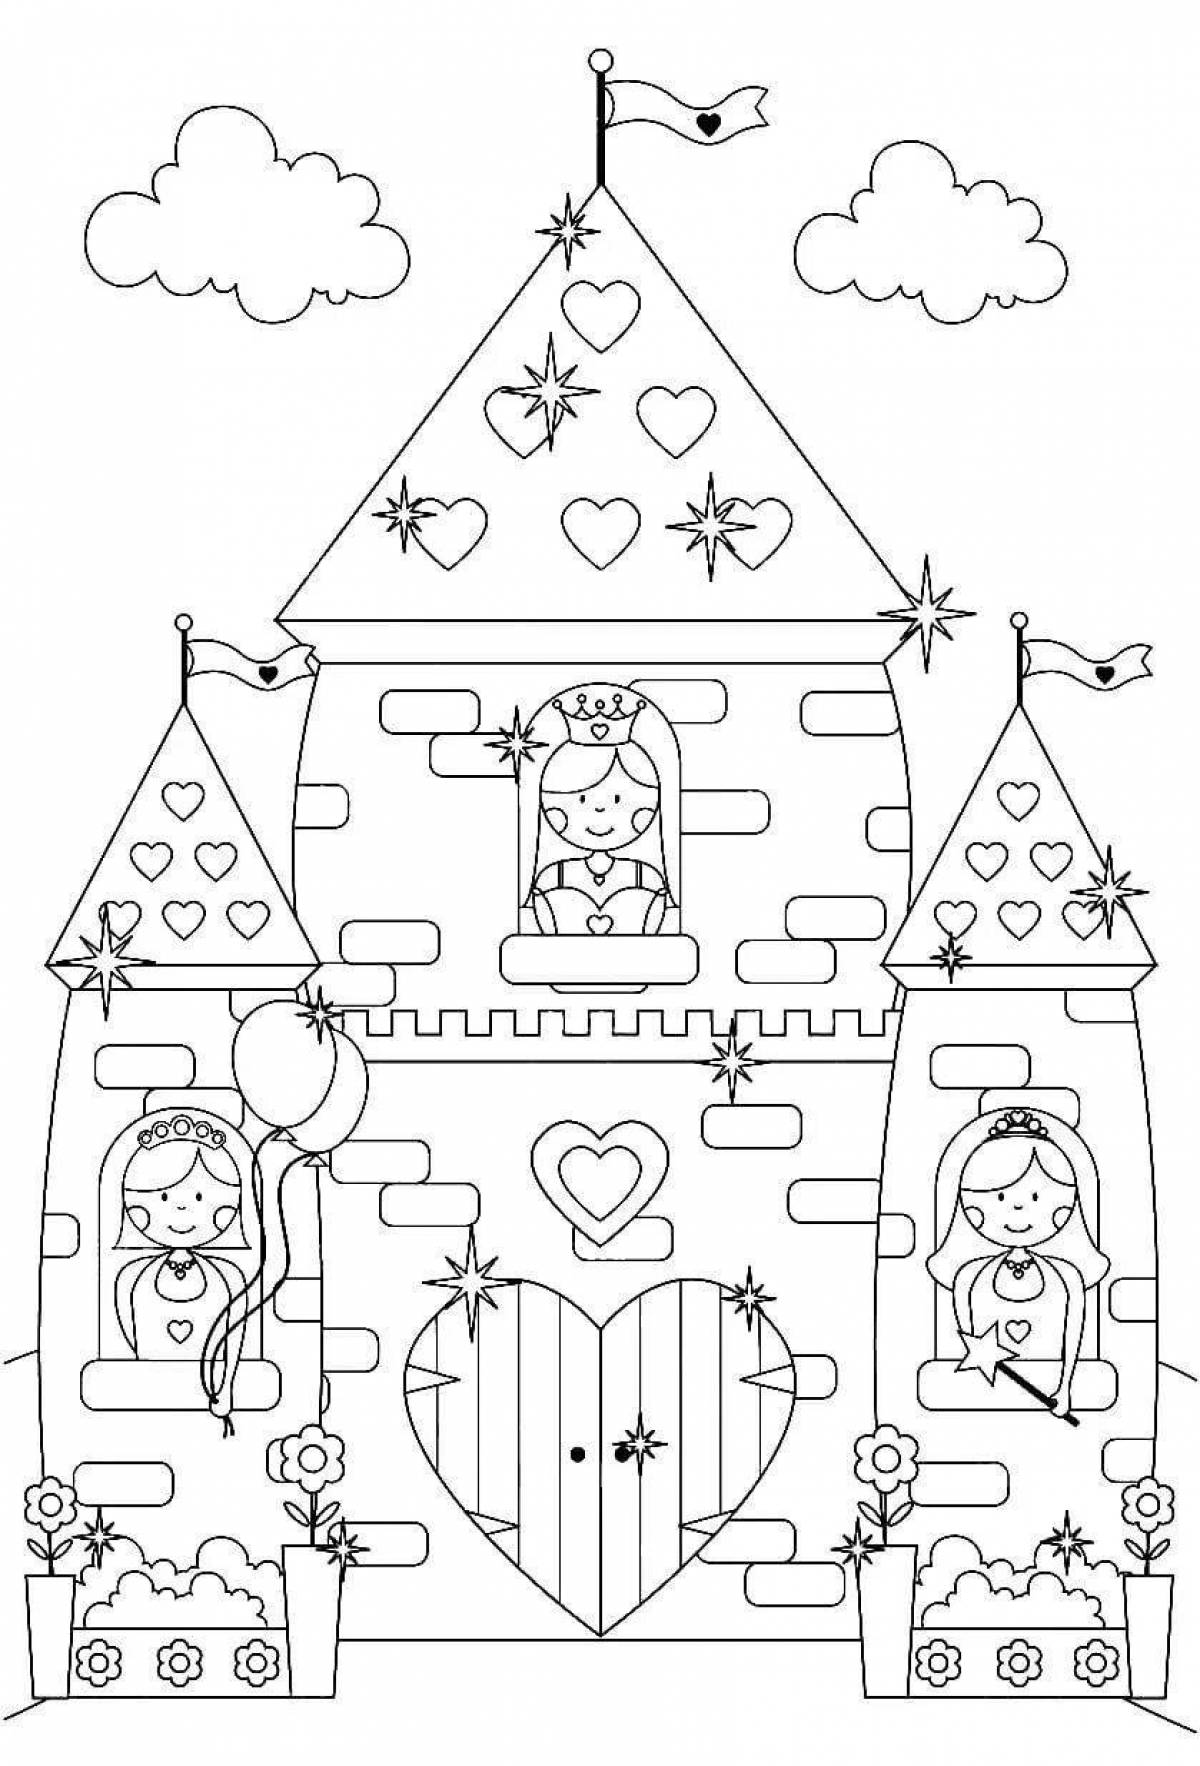 Adorable princess house coloring book for kids